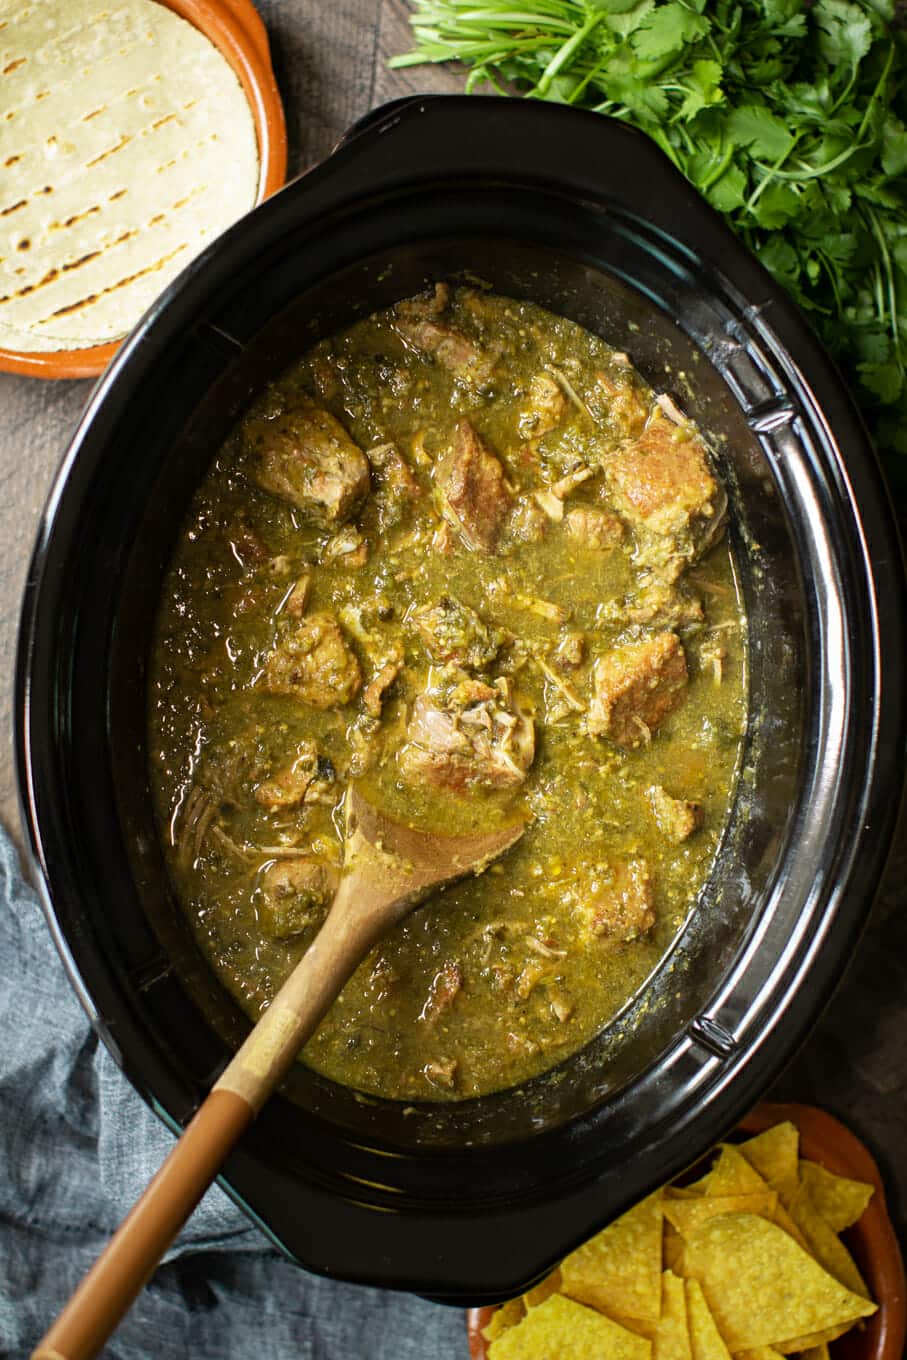 Slow Cooker Chile Verde The Magical Slow Cooker,Parmesan Cheese Wheel